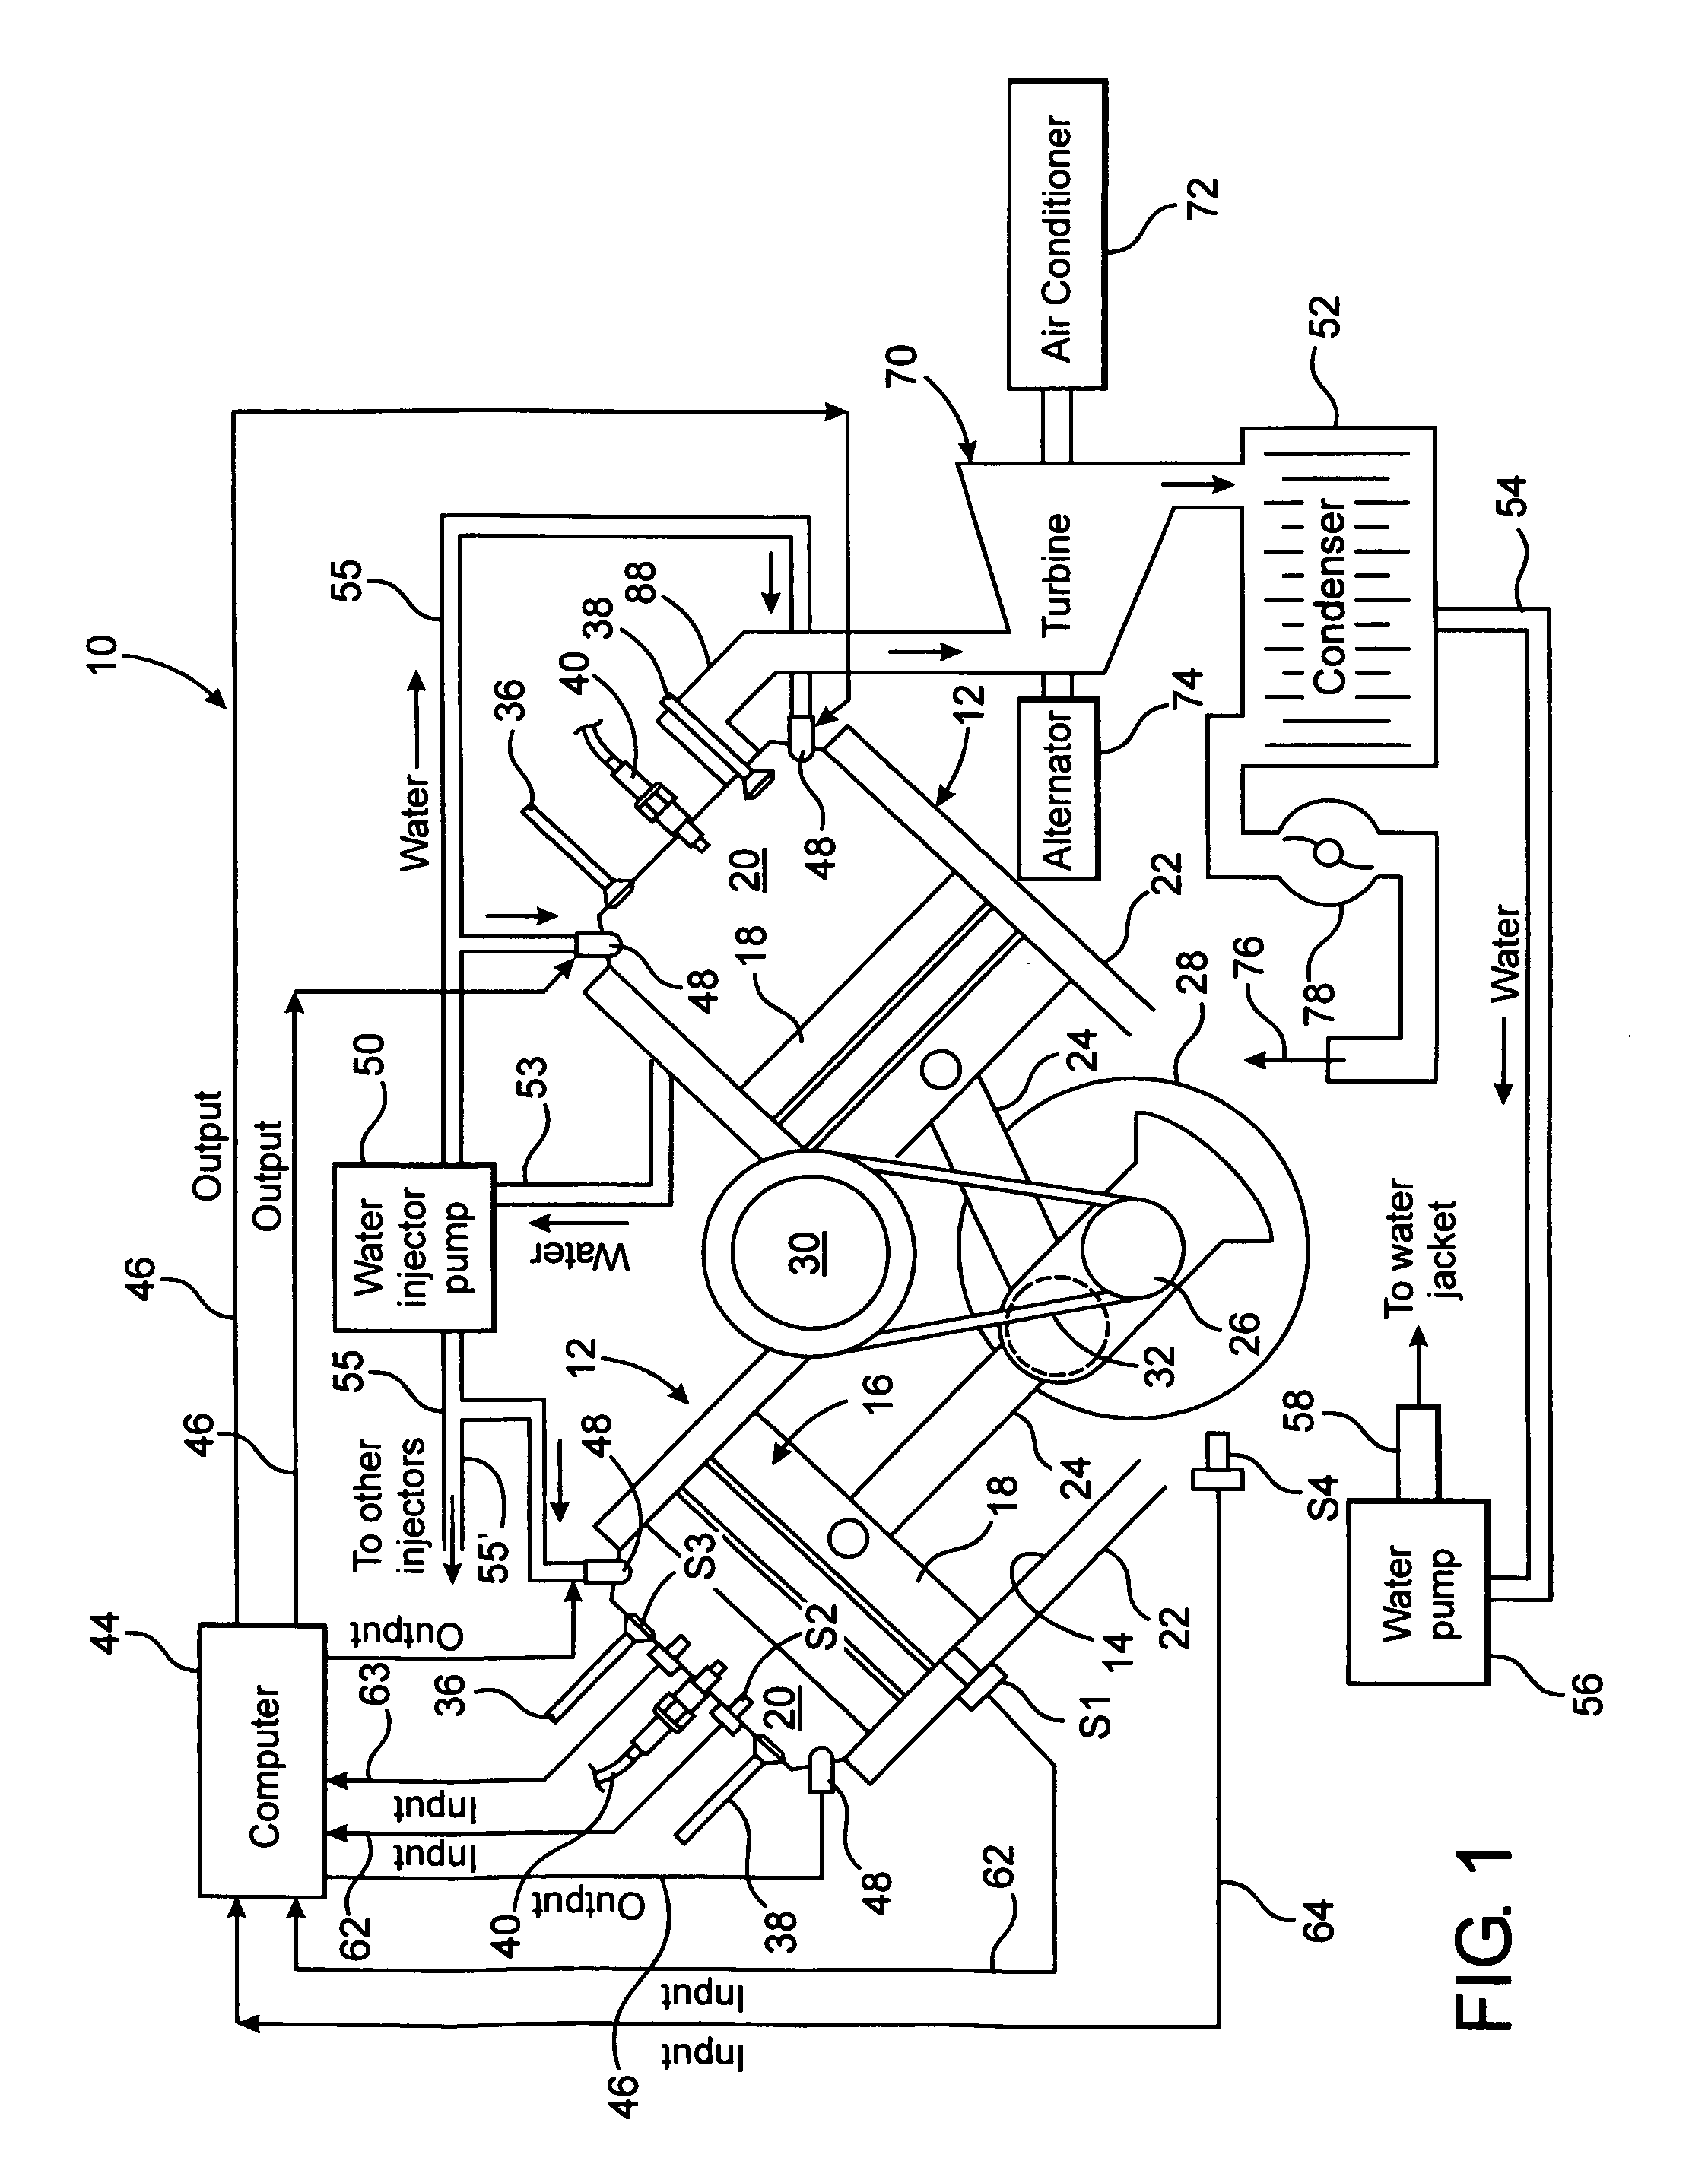 System and method for recovering wasted energy from an internal combustion engine